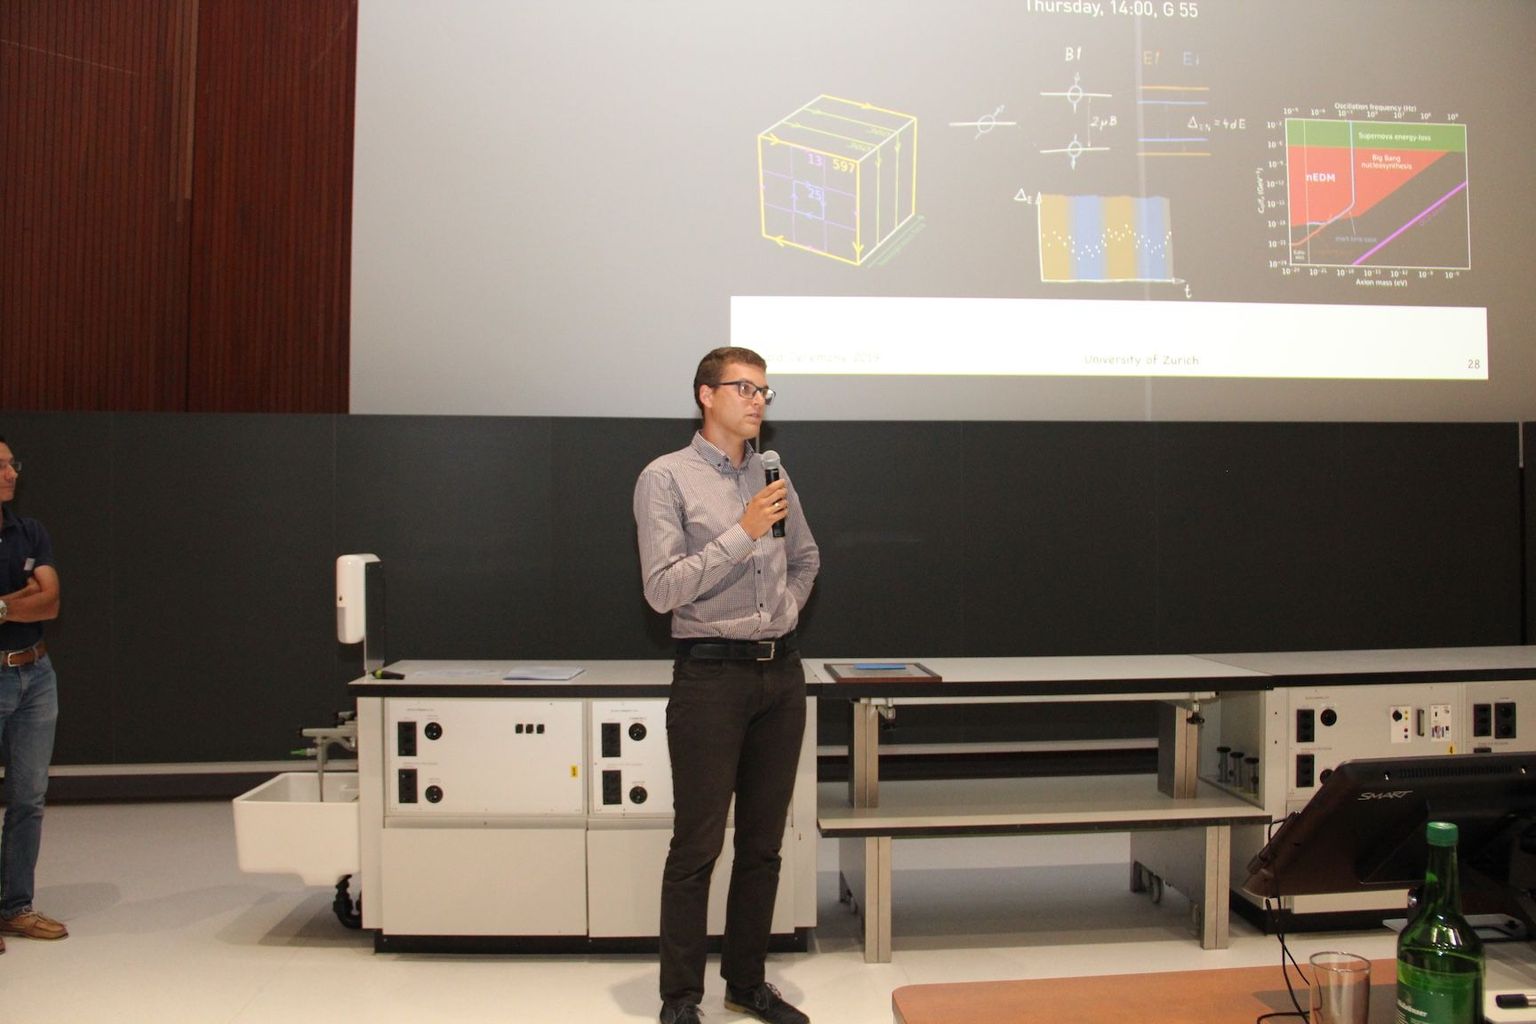 CHIPP Prize 2019 Michal Rawlik at the SPS/OPG joint meeting at the University of Zurich